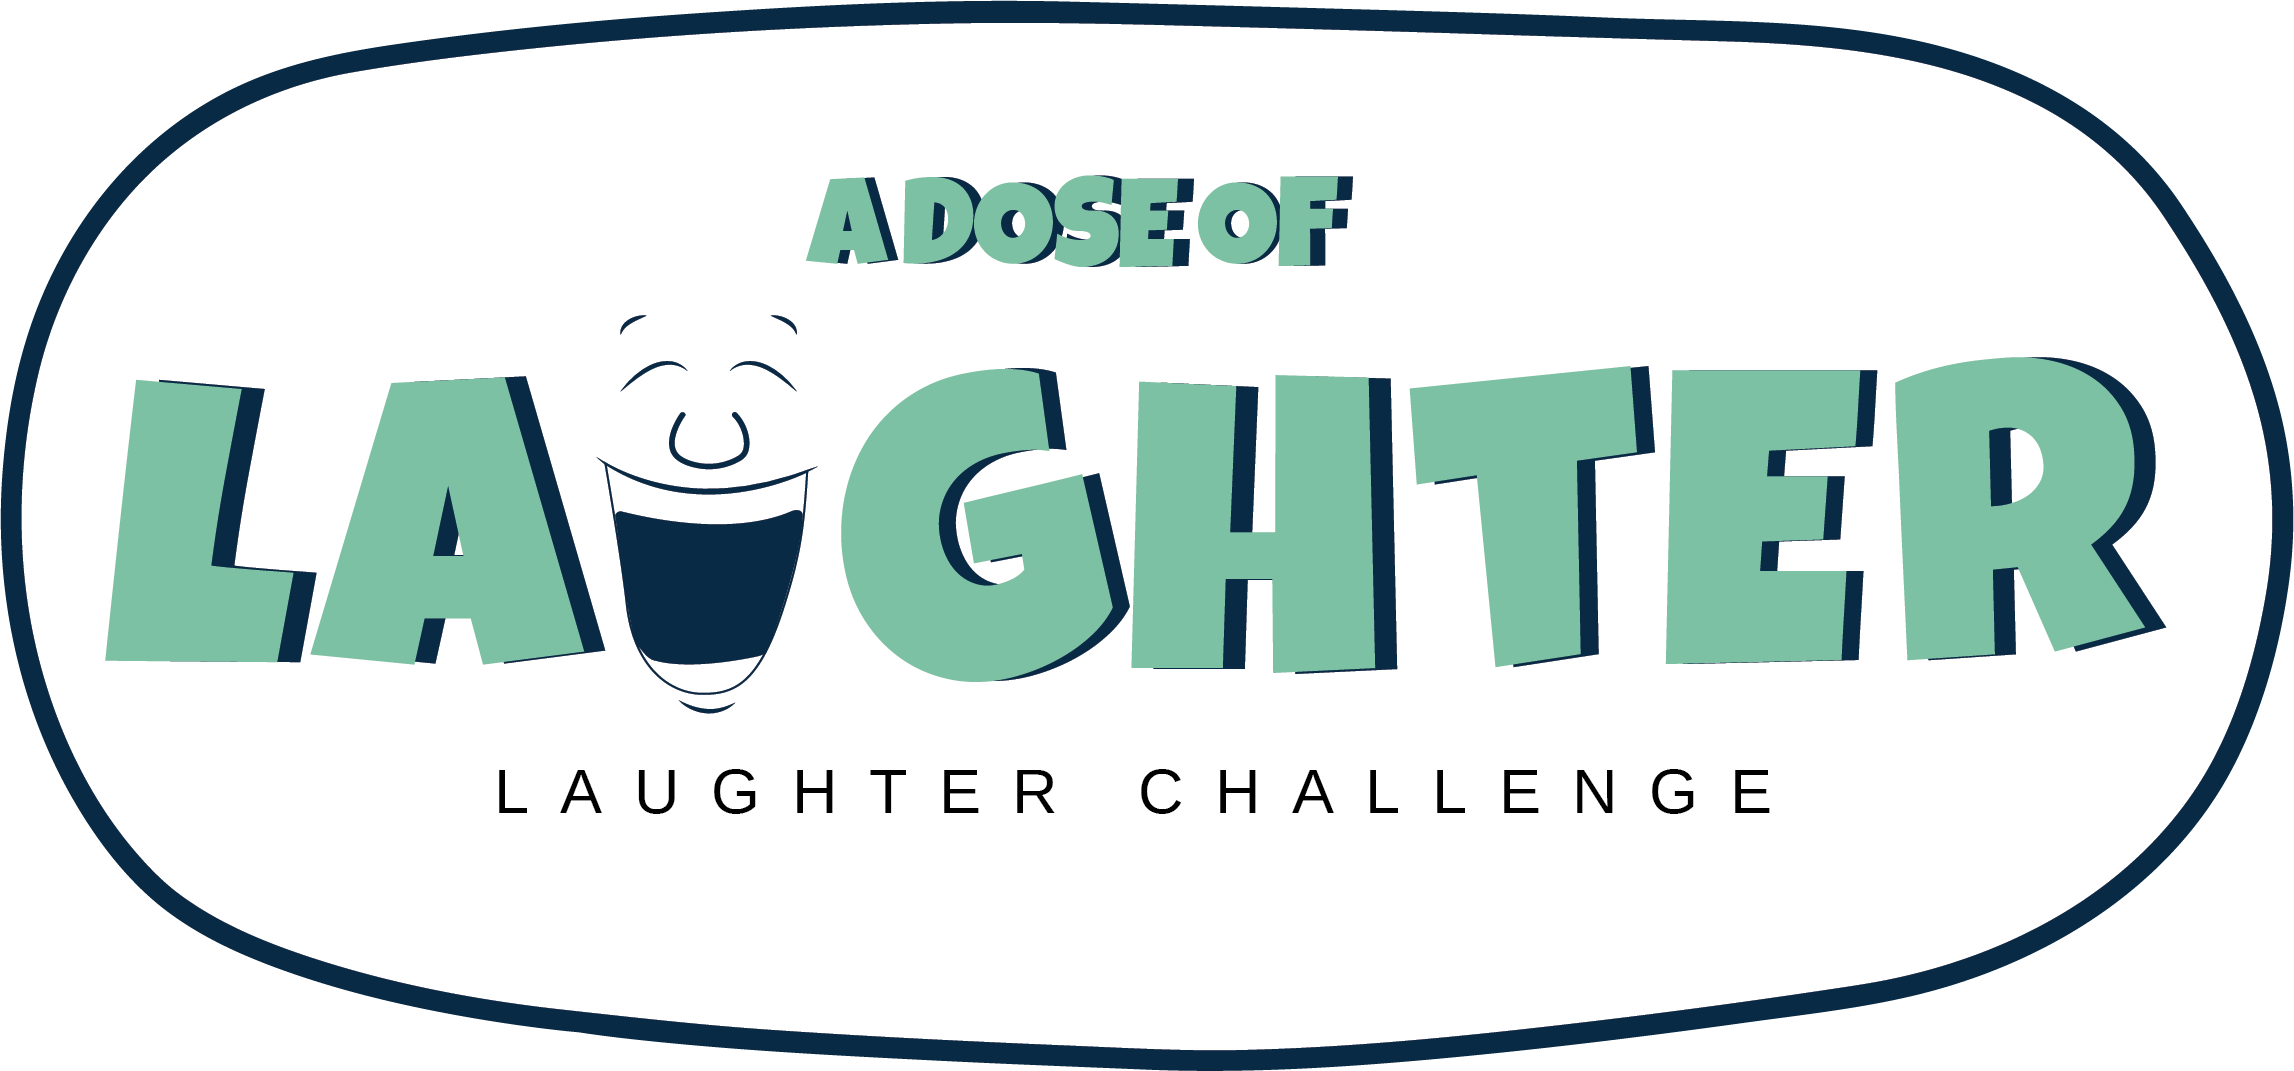 Laughter Challenge